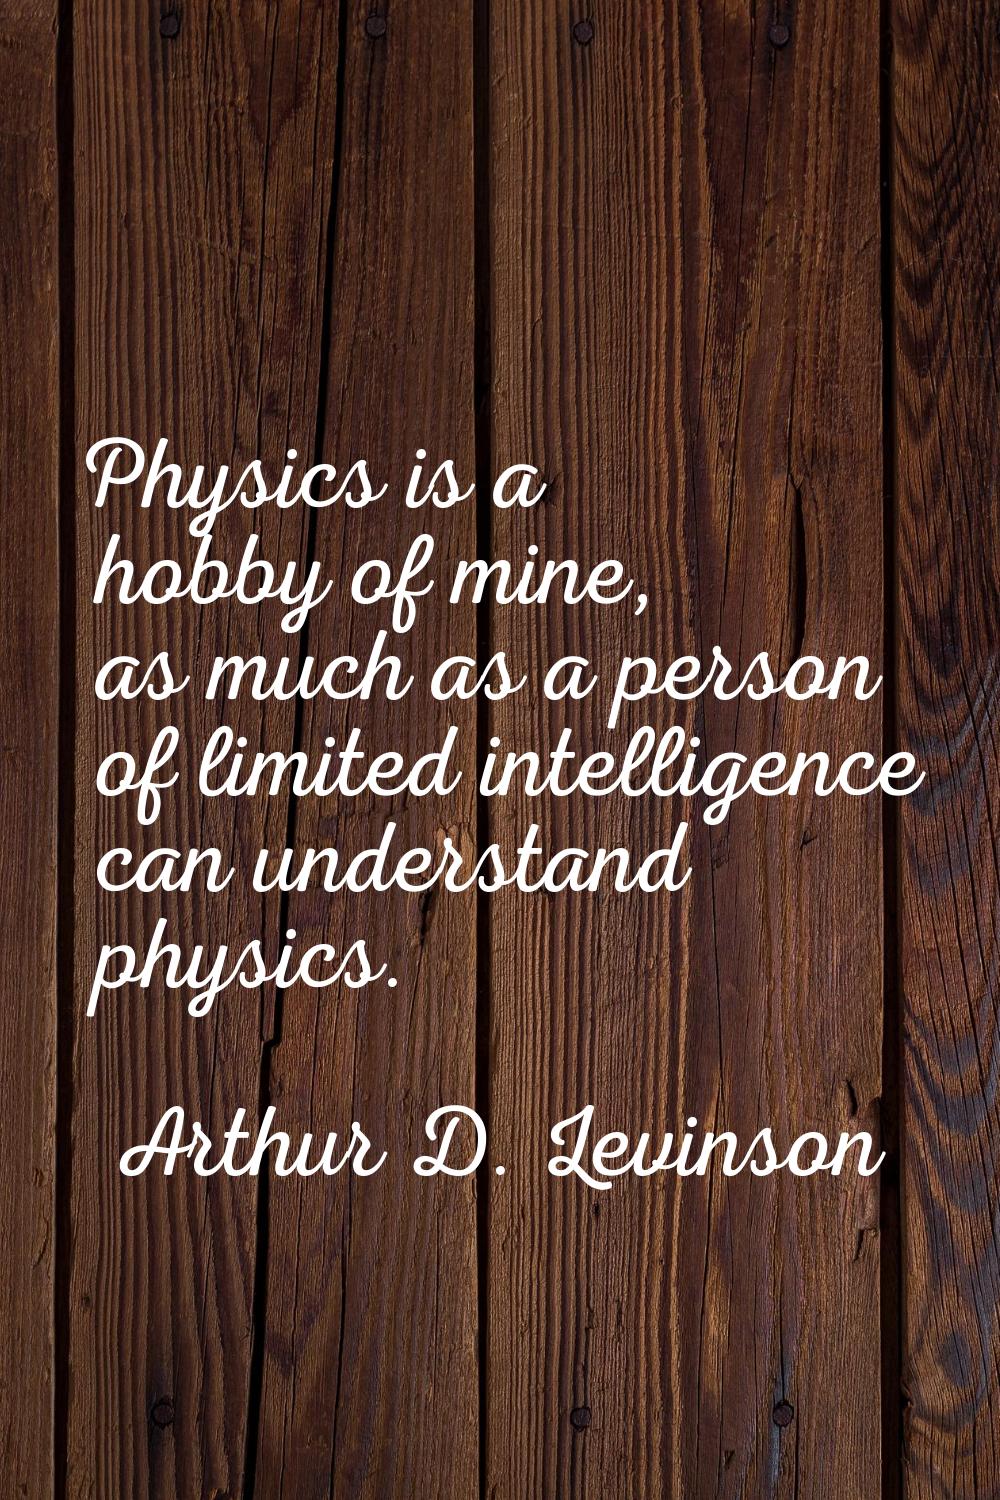 Physics is a hobby of mine, as much as a person of limited intelligence can understand physics.